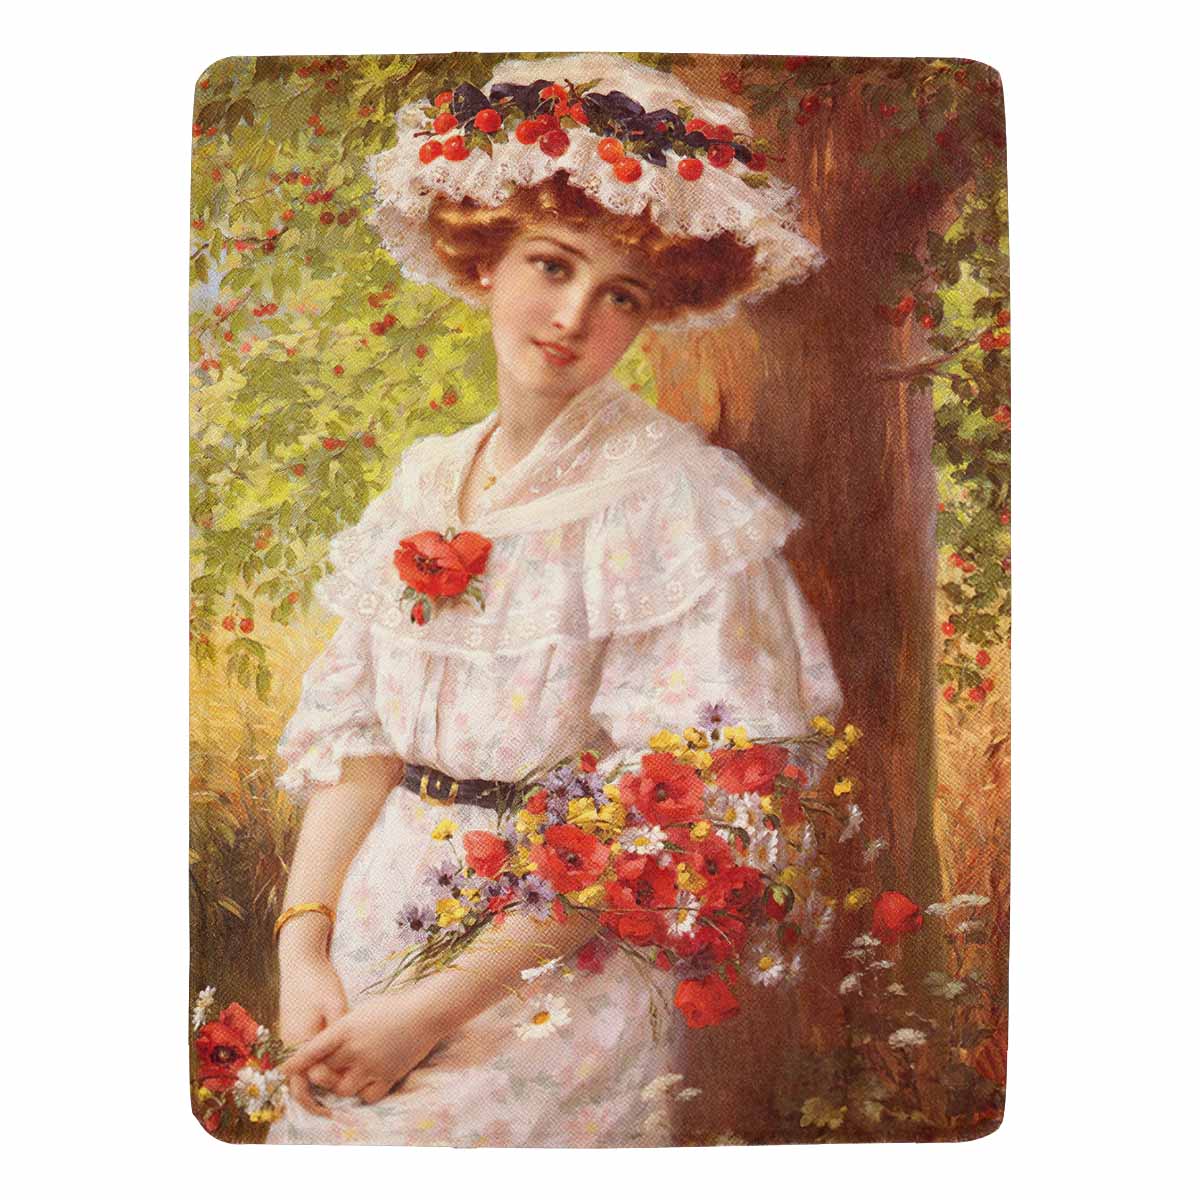 Victorian Lady Design BLANKET, LARGE 60 in x 80 in, Under The Cherry Tree